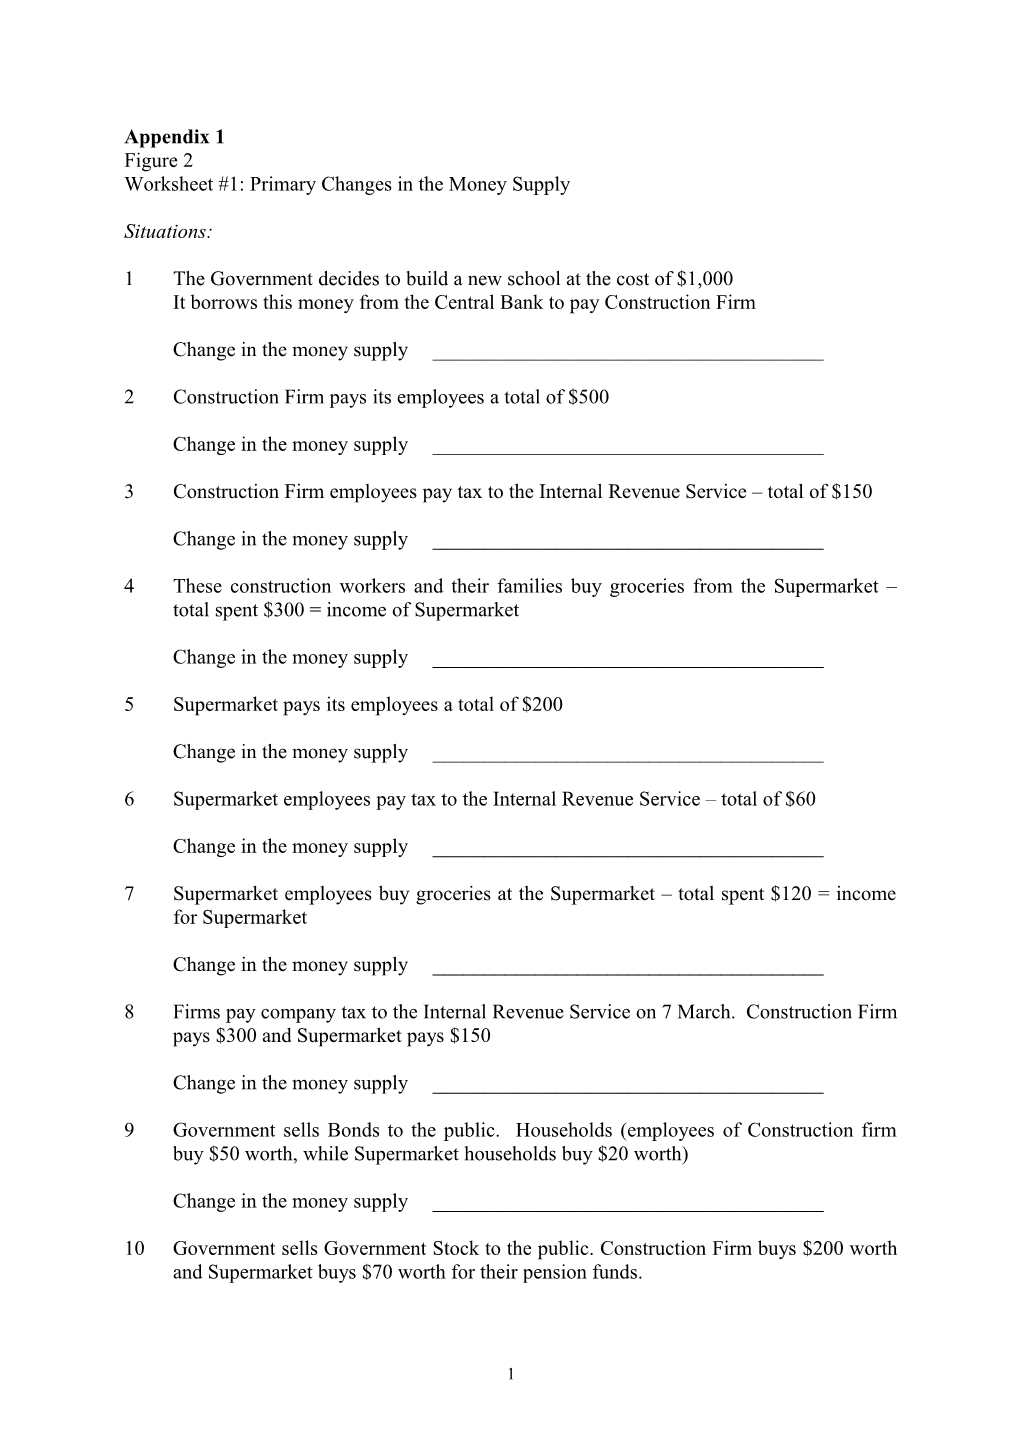 Worksheet #1: Primary Changes in the Money Supply